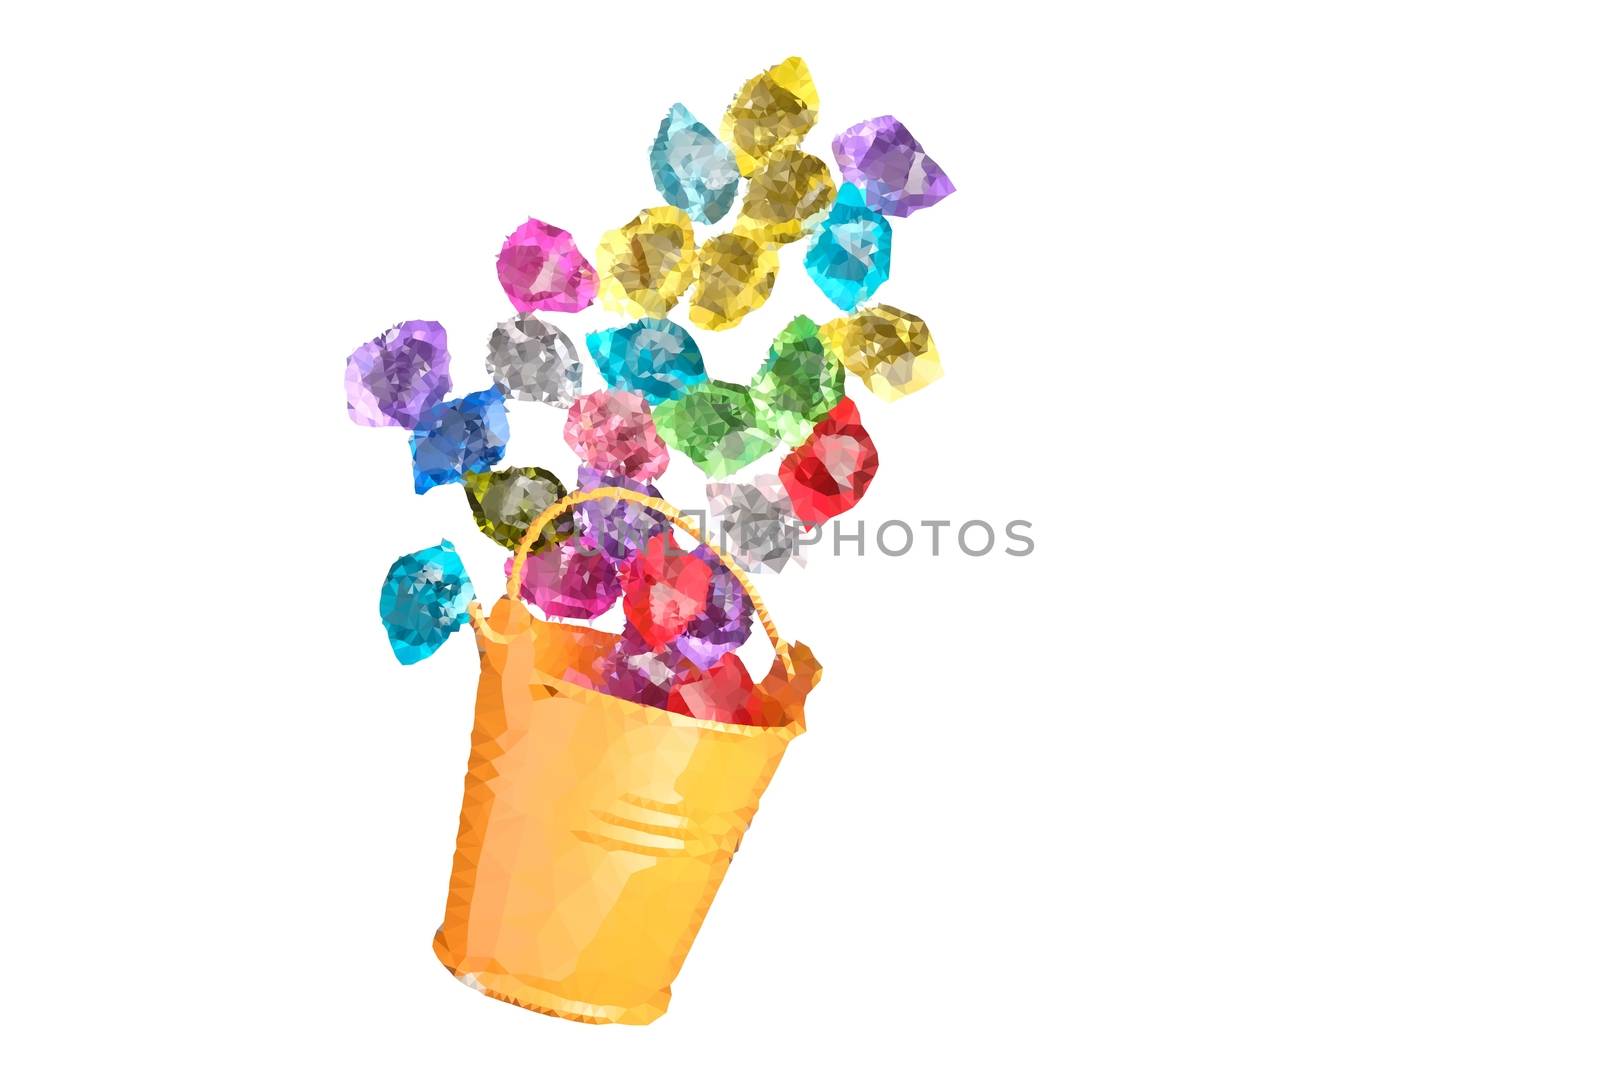 The Abstract Triangles line precious stones artificial color in bucket on white background by peerapixs